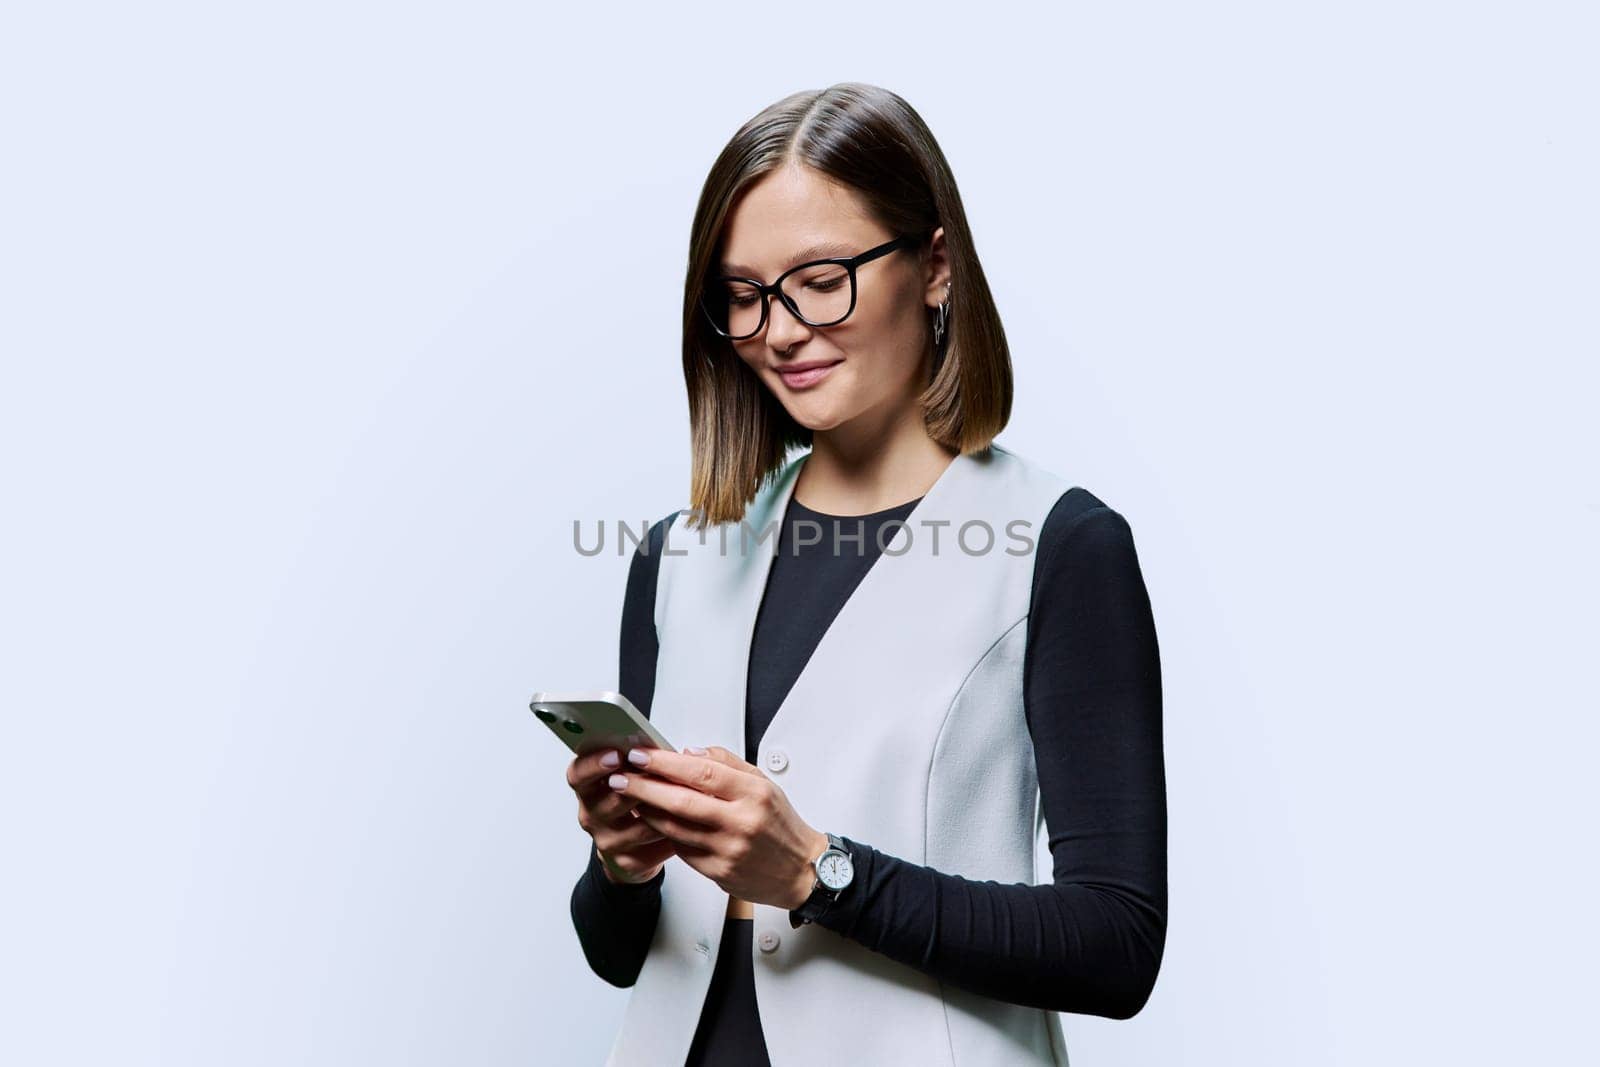 Young confident woman with smartphone in hands on white studio background. Serious female in glasses looking at phone screen texting reading. Using mobile applications for work business study leisure